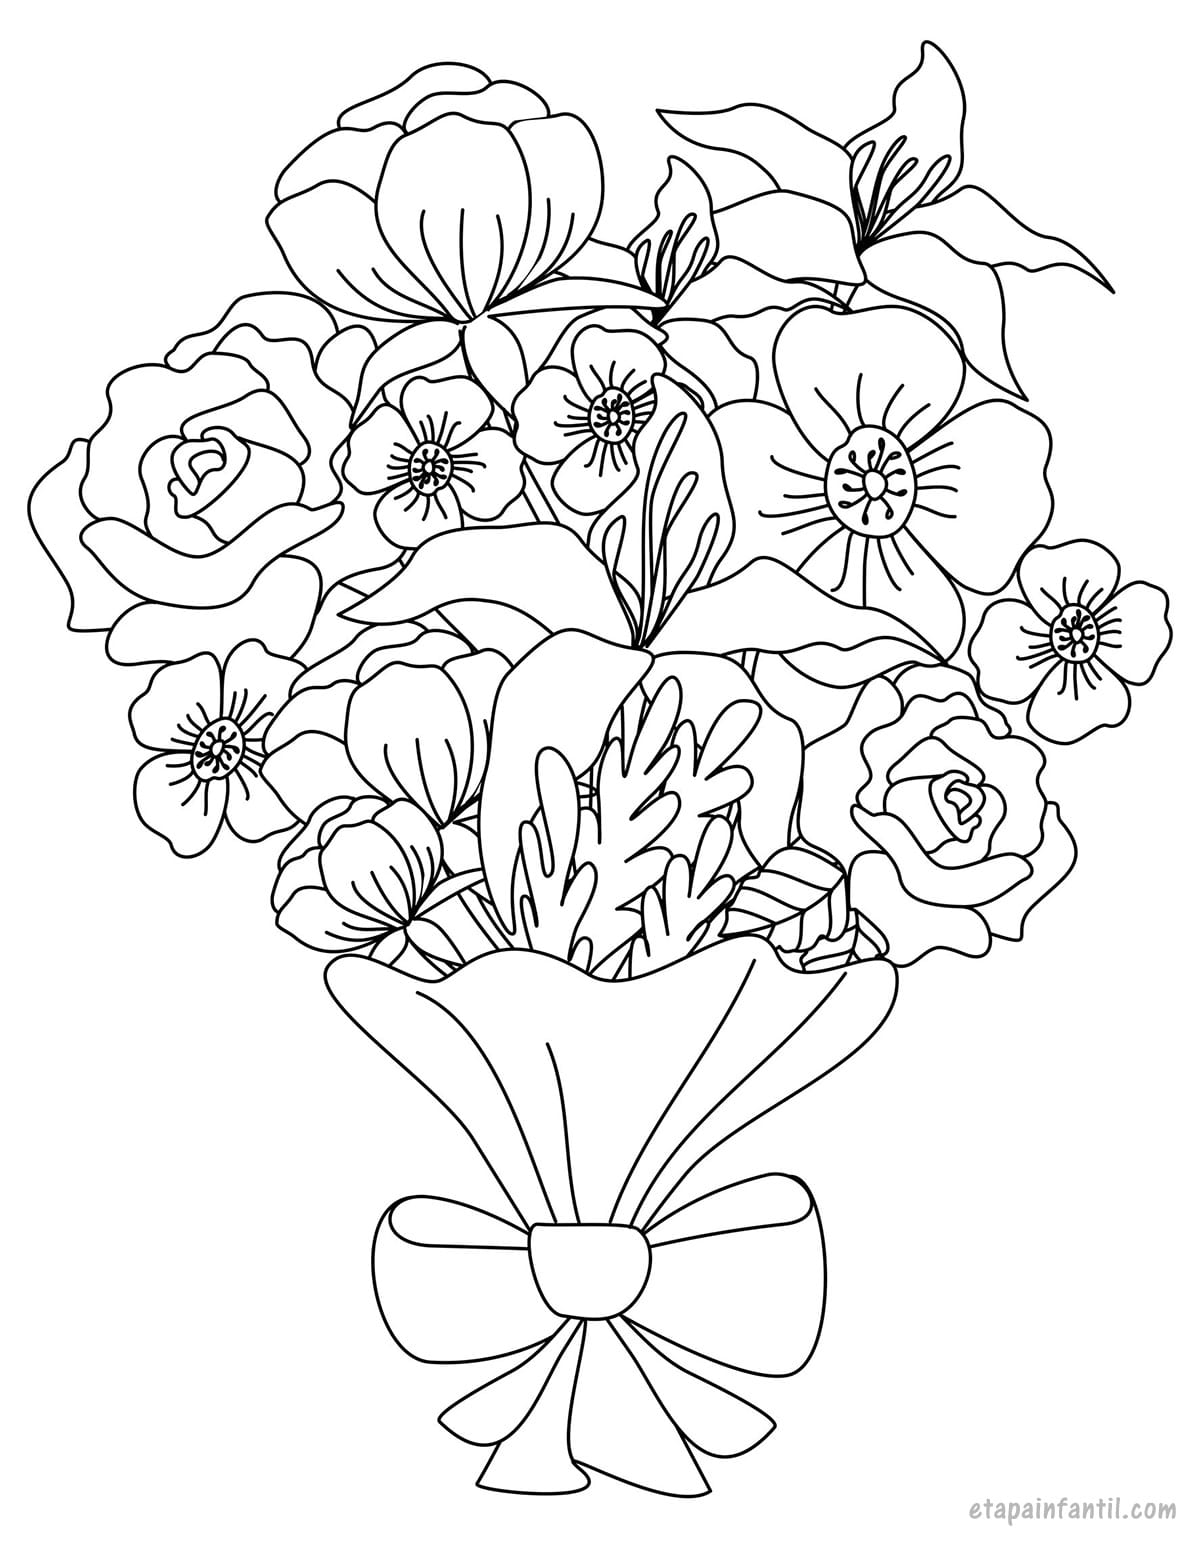 Drawing of bouquet of flowers to color